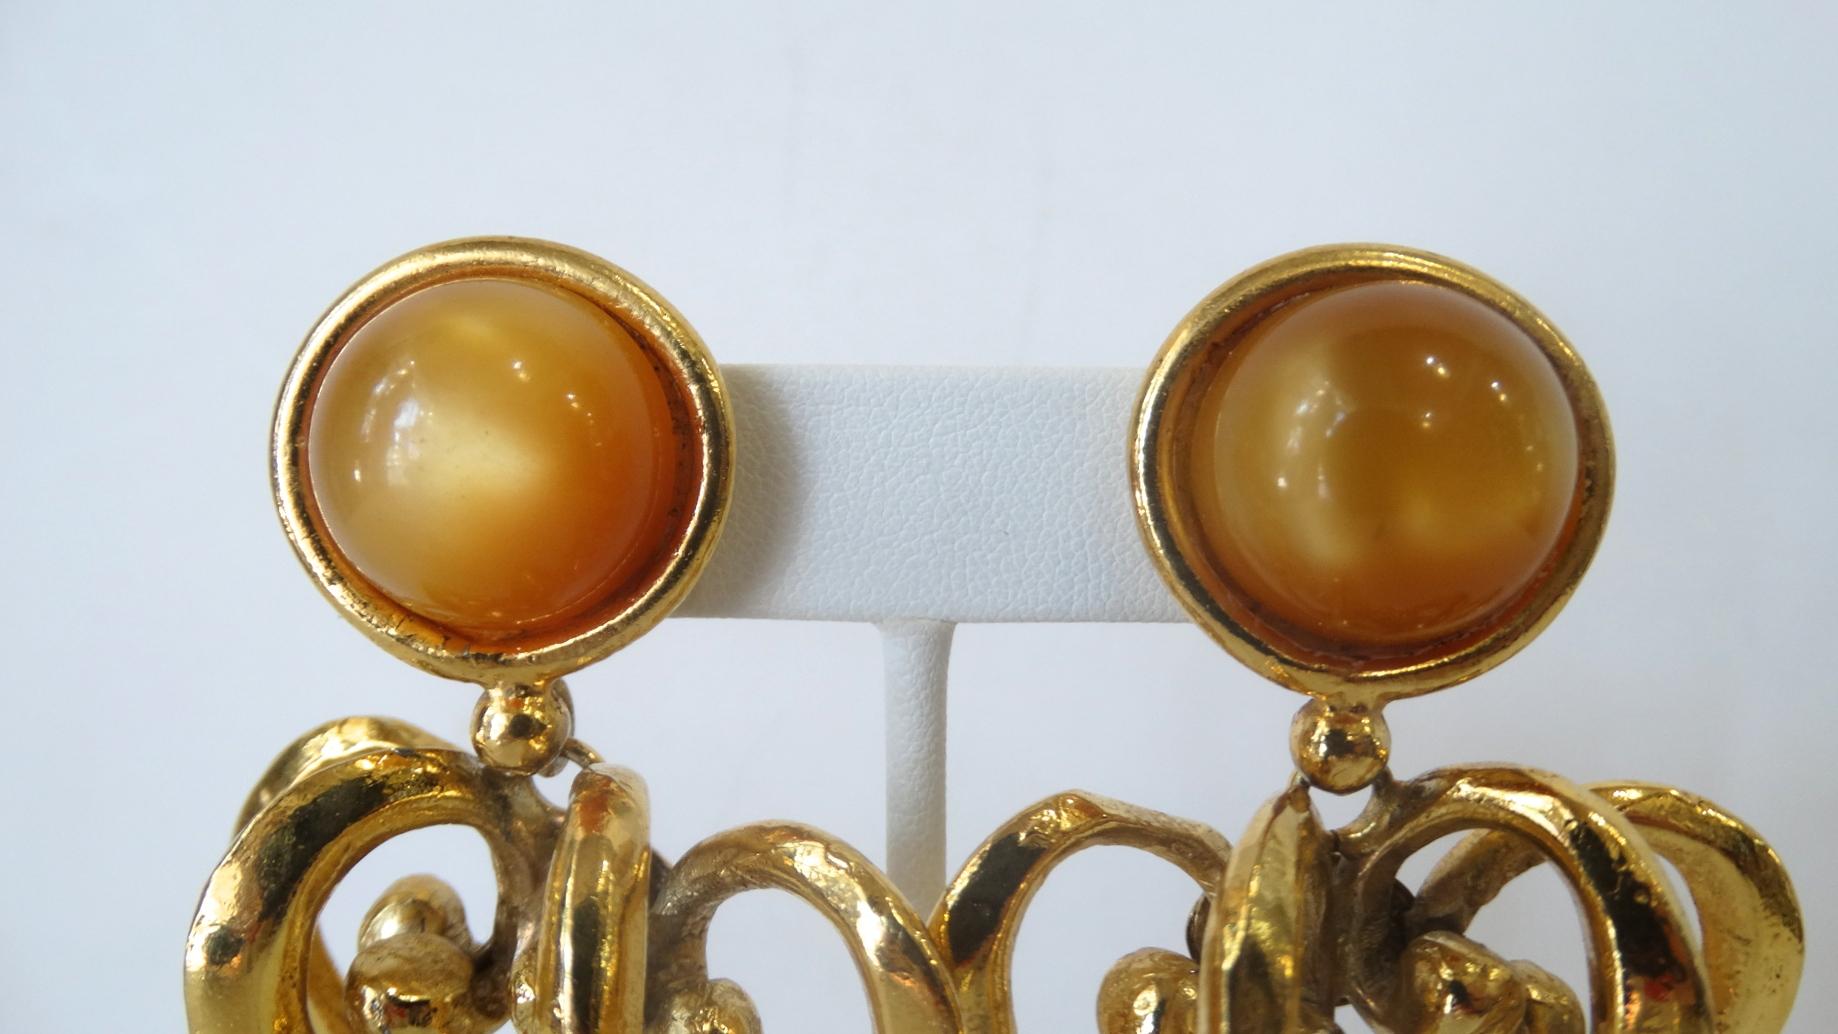 The Most Amazing Lacroix Earrings Are Here! Circa 1980s, these gold plated drop earrings feature two tiered Baroque style scroll hearts and a small amber colored bead hanging from the end. Clip on closures include an amber colored acrylic gem as the